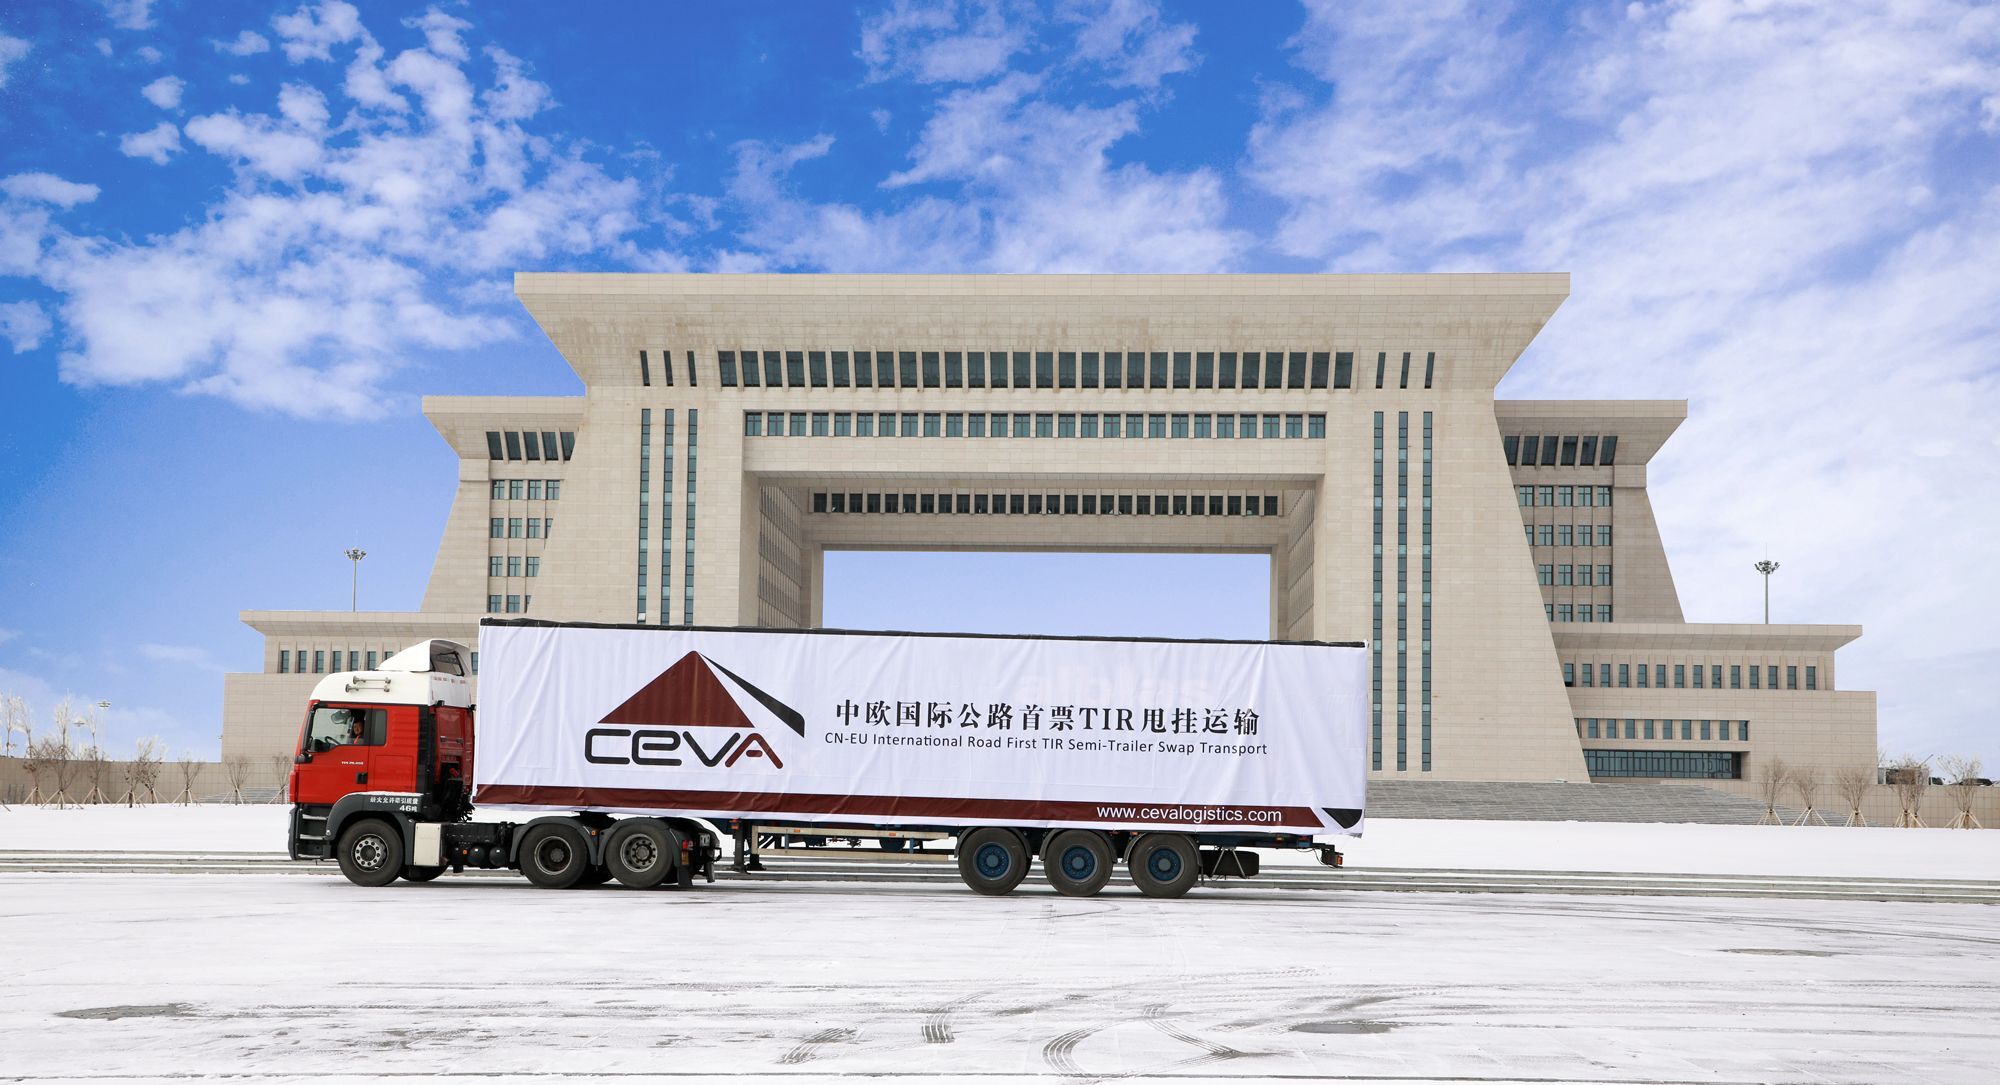 China Europe Truck Service Gears Up For January Launch After Successful Pilot The Loadstar